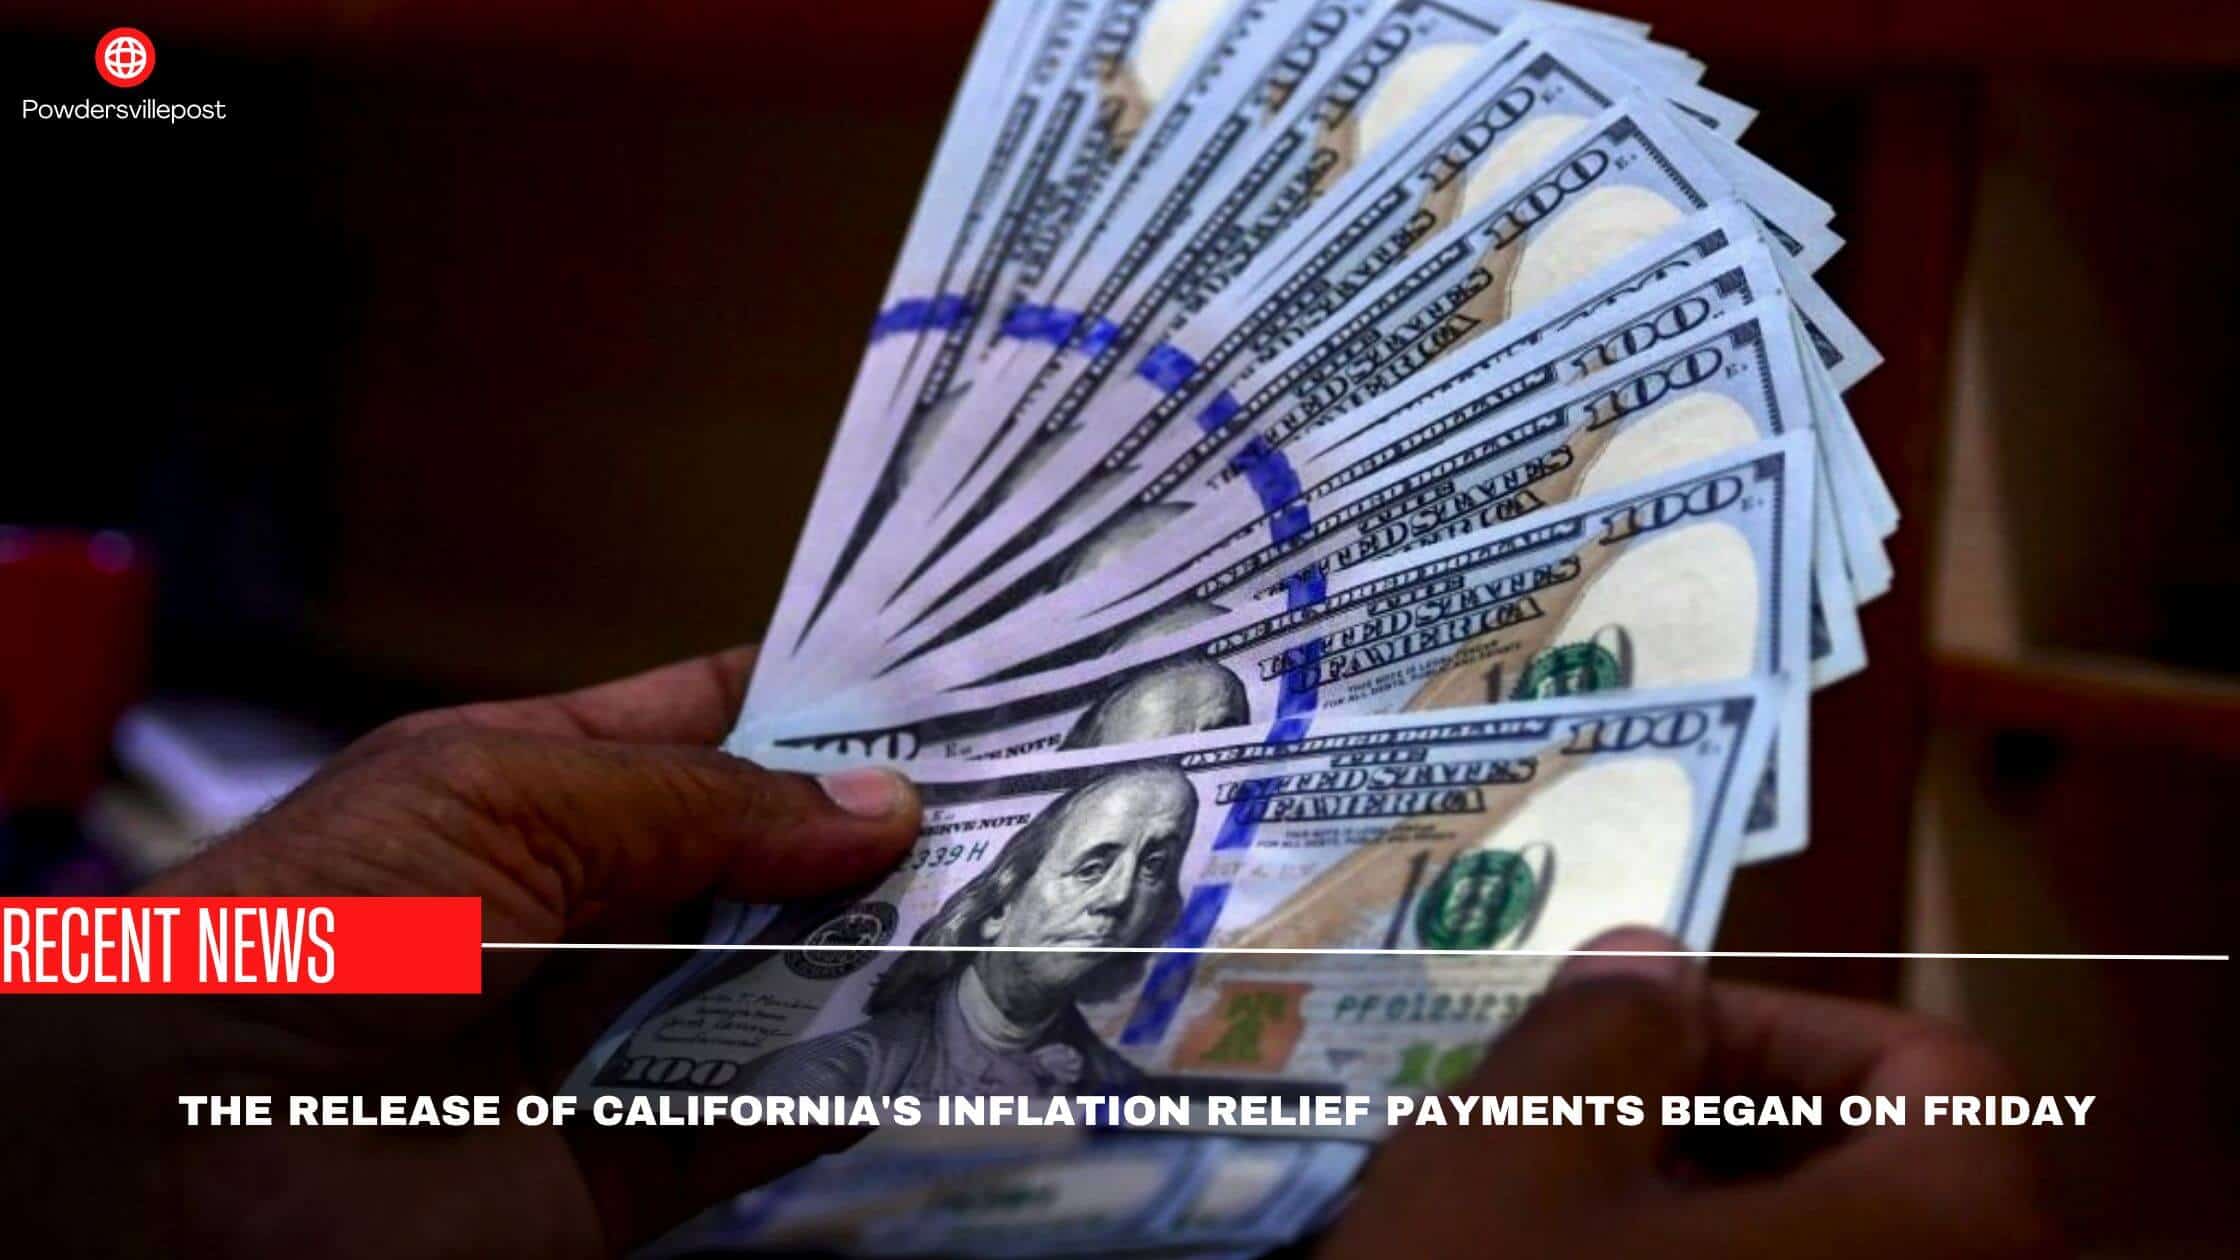 The Release Of California's Inflation Relief Payments Began On Friday